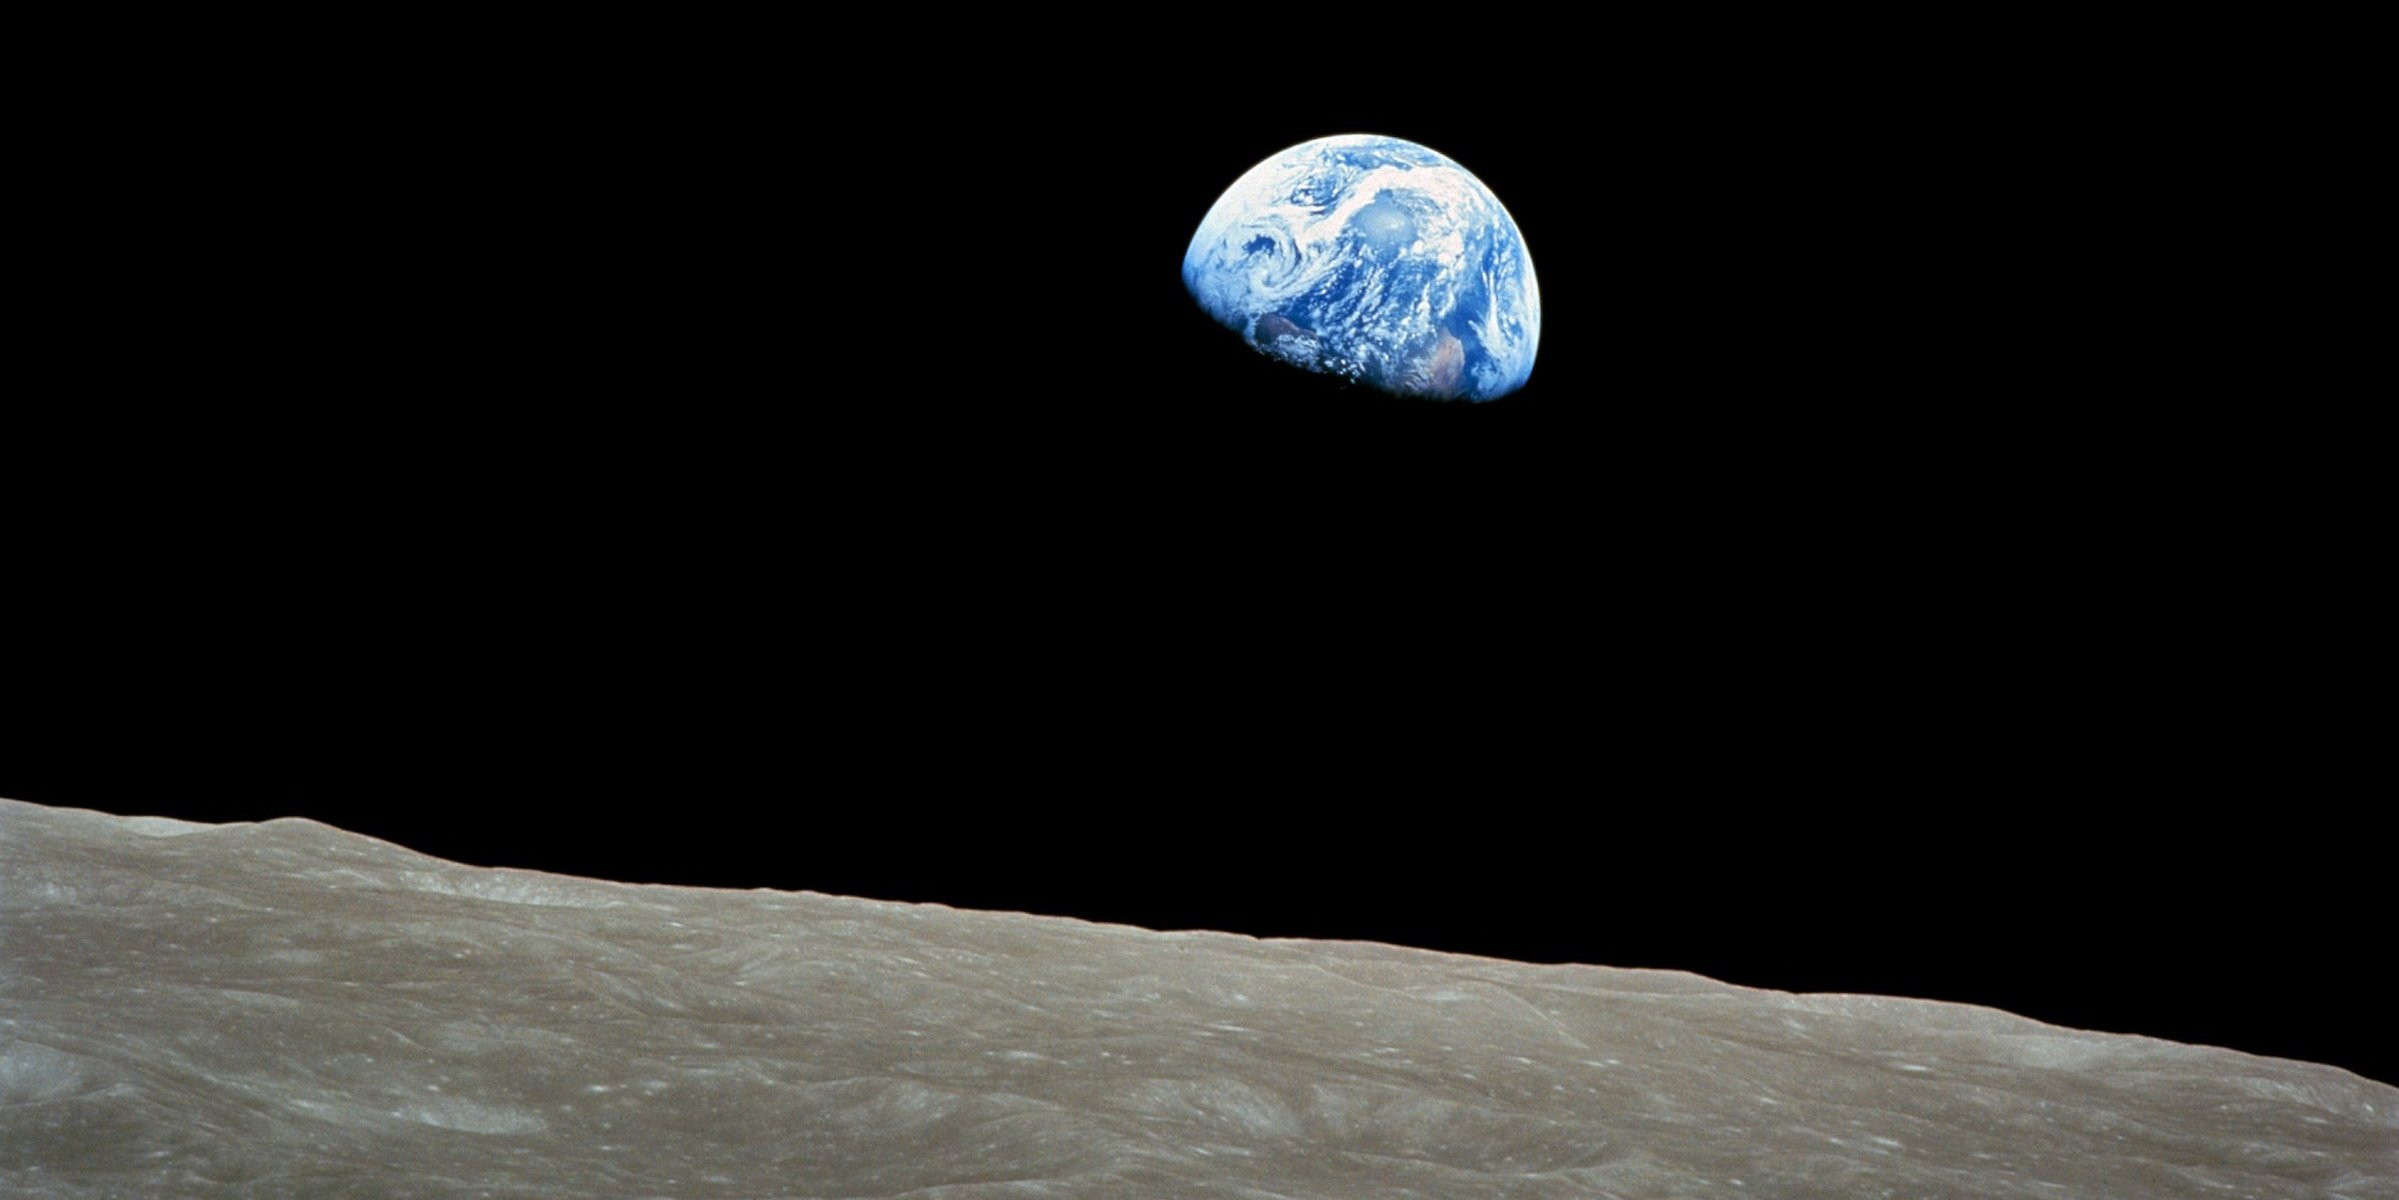      "Earthrise" is the first image of Earth captured by humans from space.      The photo of Earth was taken aboard Apollo 8 on December 24, 1968, by lunar module pilot Bill Anders.     The image made people aware of Earth's fragility, since it was seen against the blackness of space.  On December 24, 1968 — exactly 50 years ago — Apollo 8 astronauts Frank Borman, Jim Lovell, and William Anders became the first humans to circle the moon.